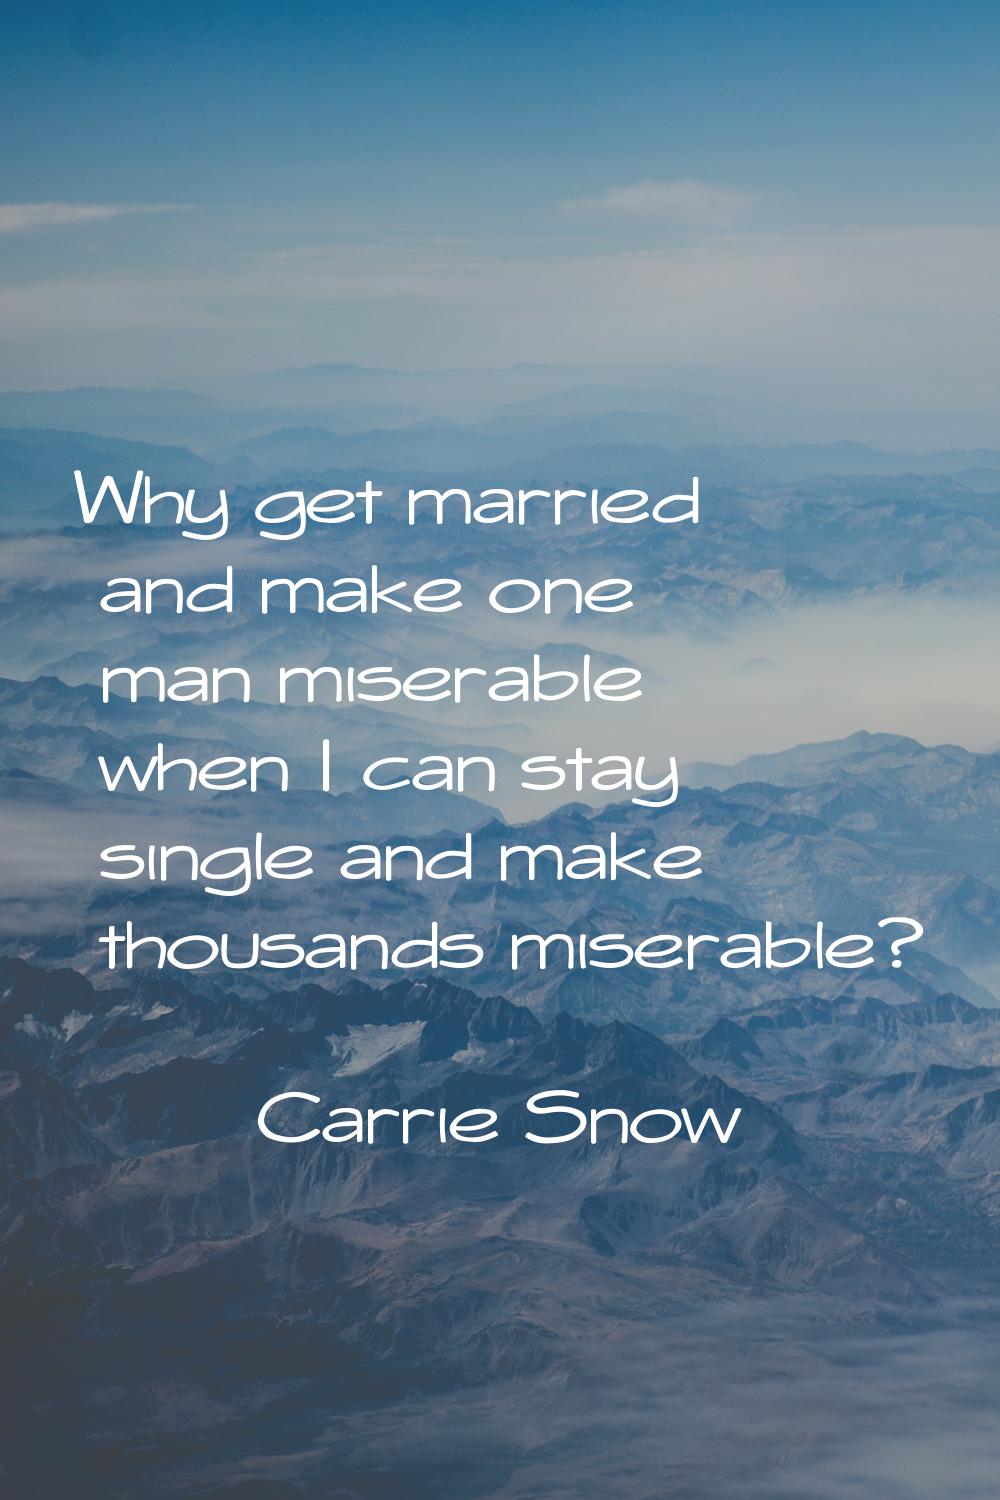 Why get married and make one man miserable when I can stay single and make thousands miserable?